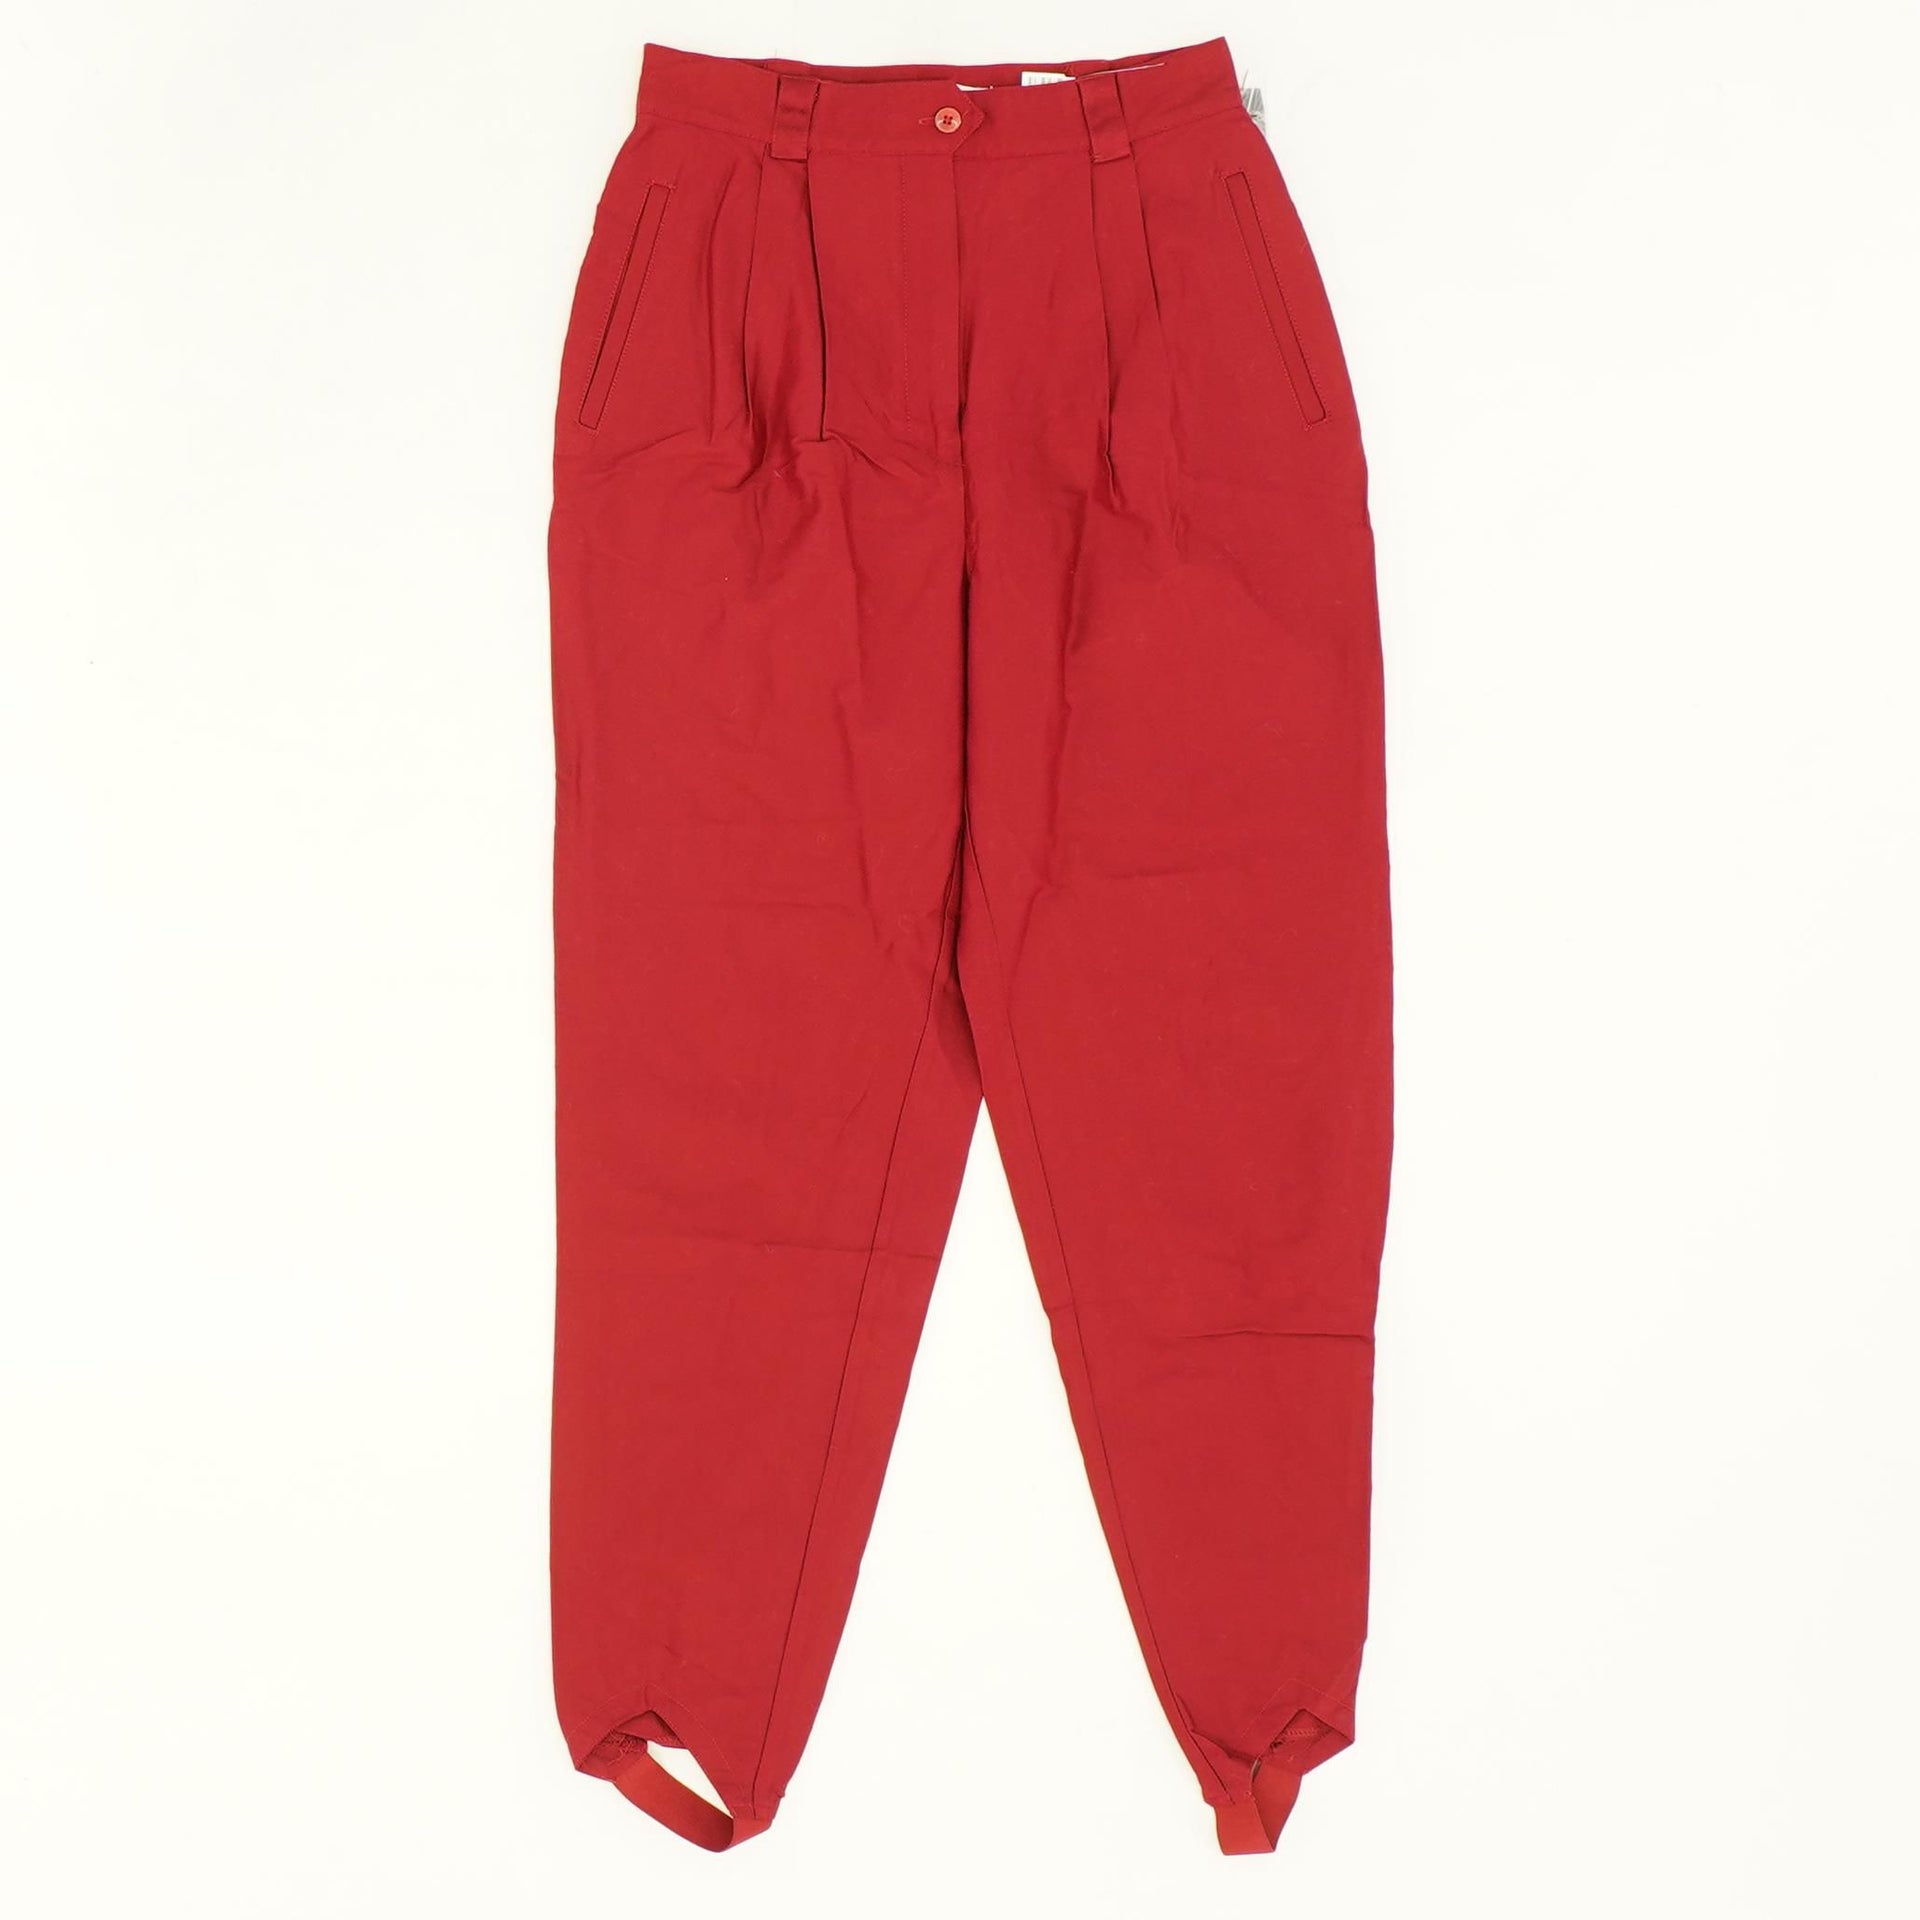 80's Red PLeated High-Waist Stirrup Pants – Unclaimed Baggage